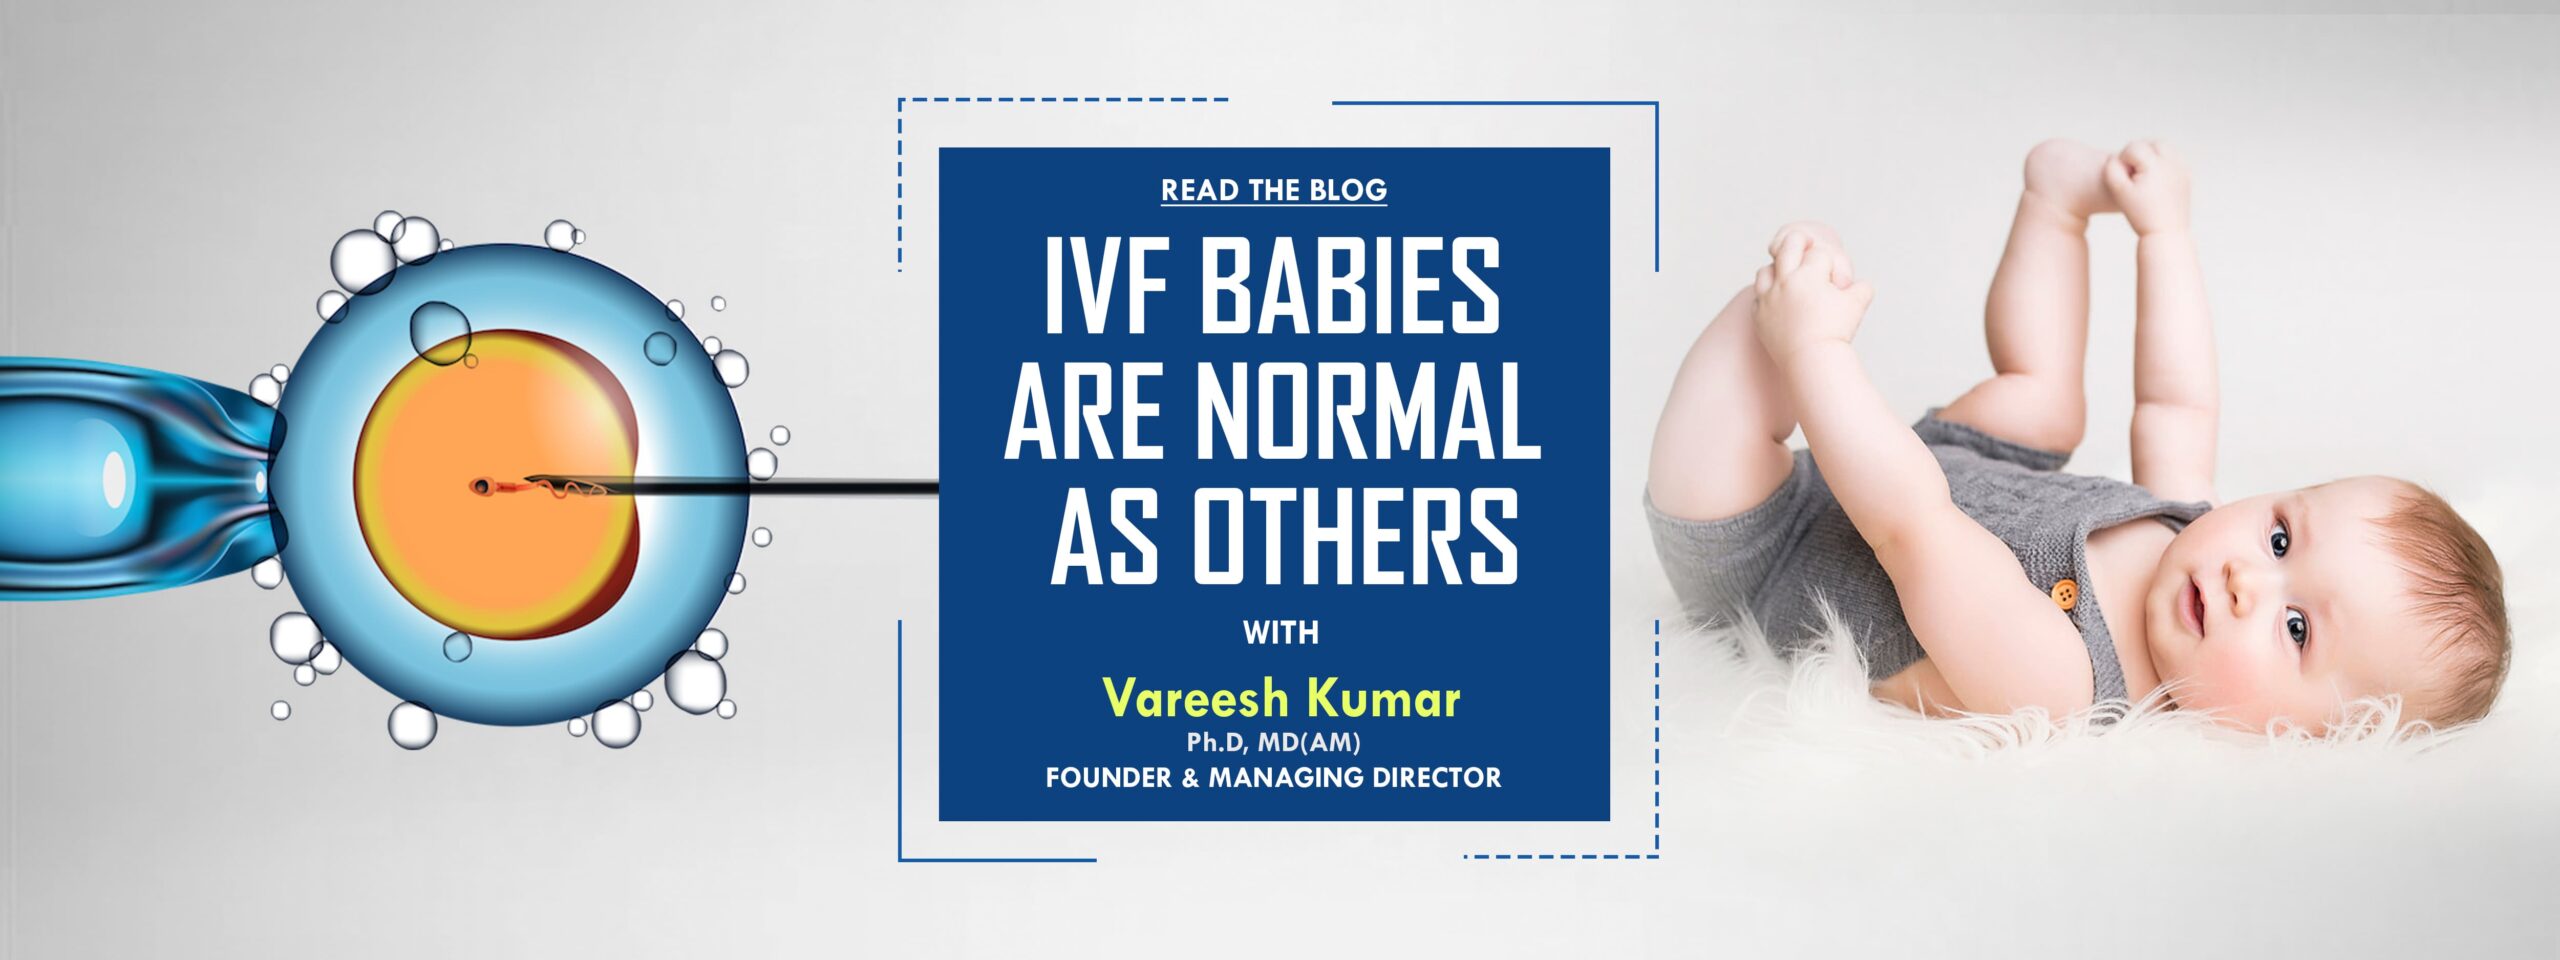 IVF Babies are Normal as Others